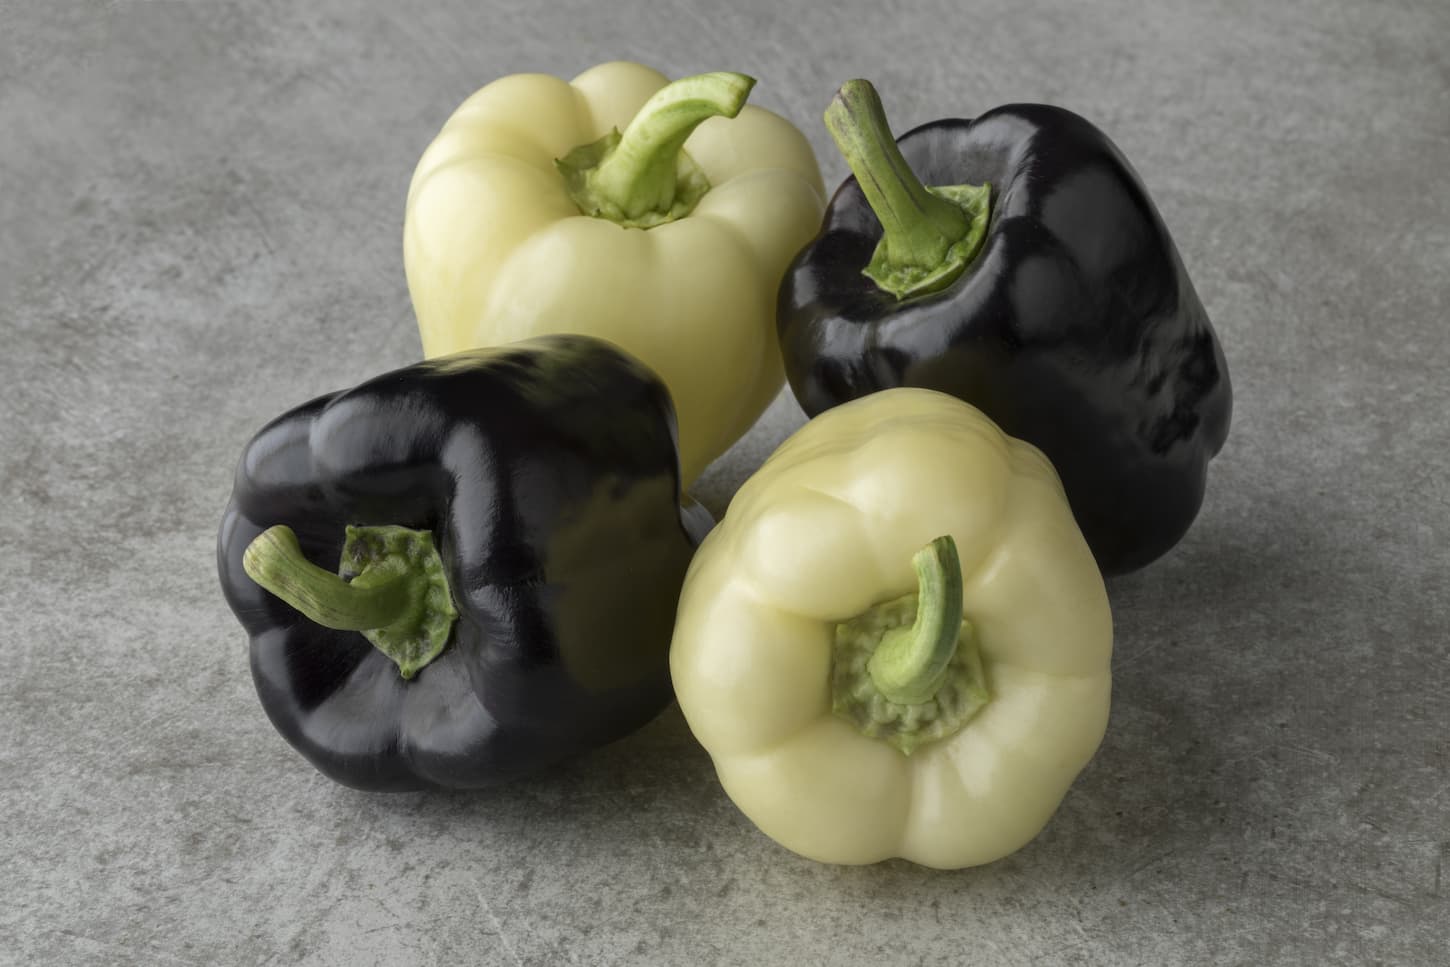 An image of purple and white bell peppers on a gray background.